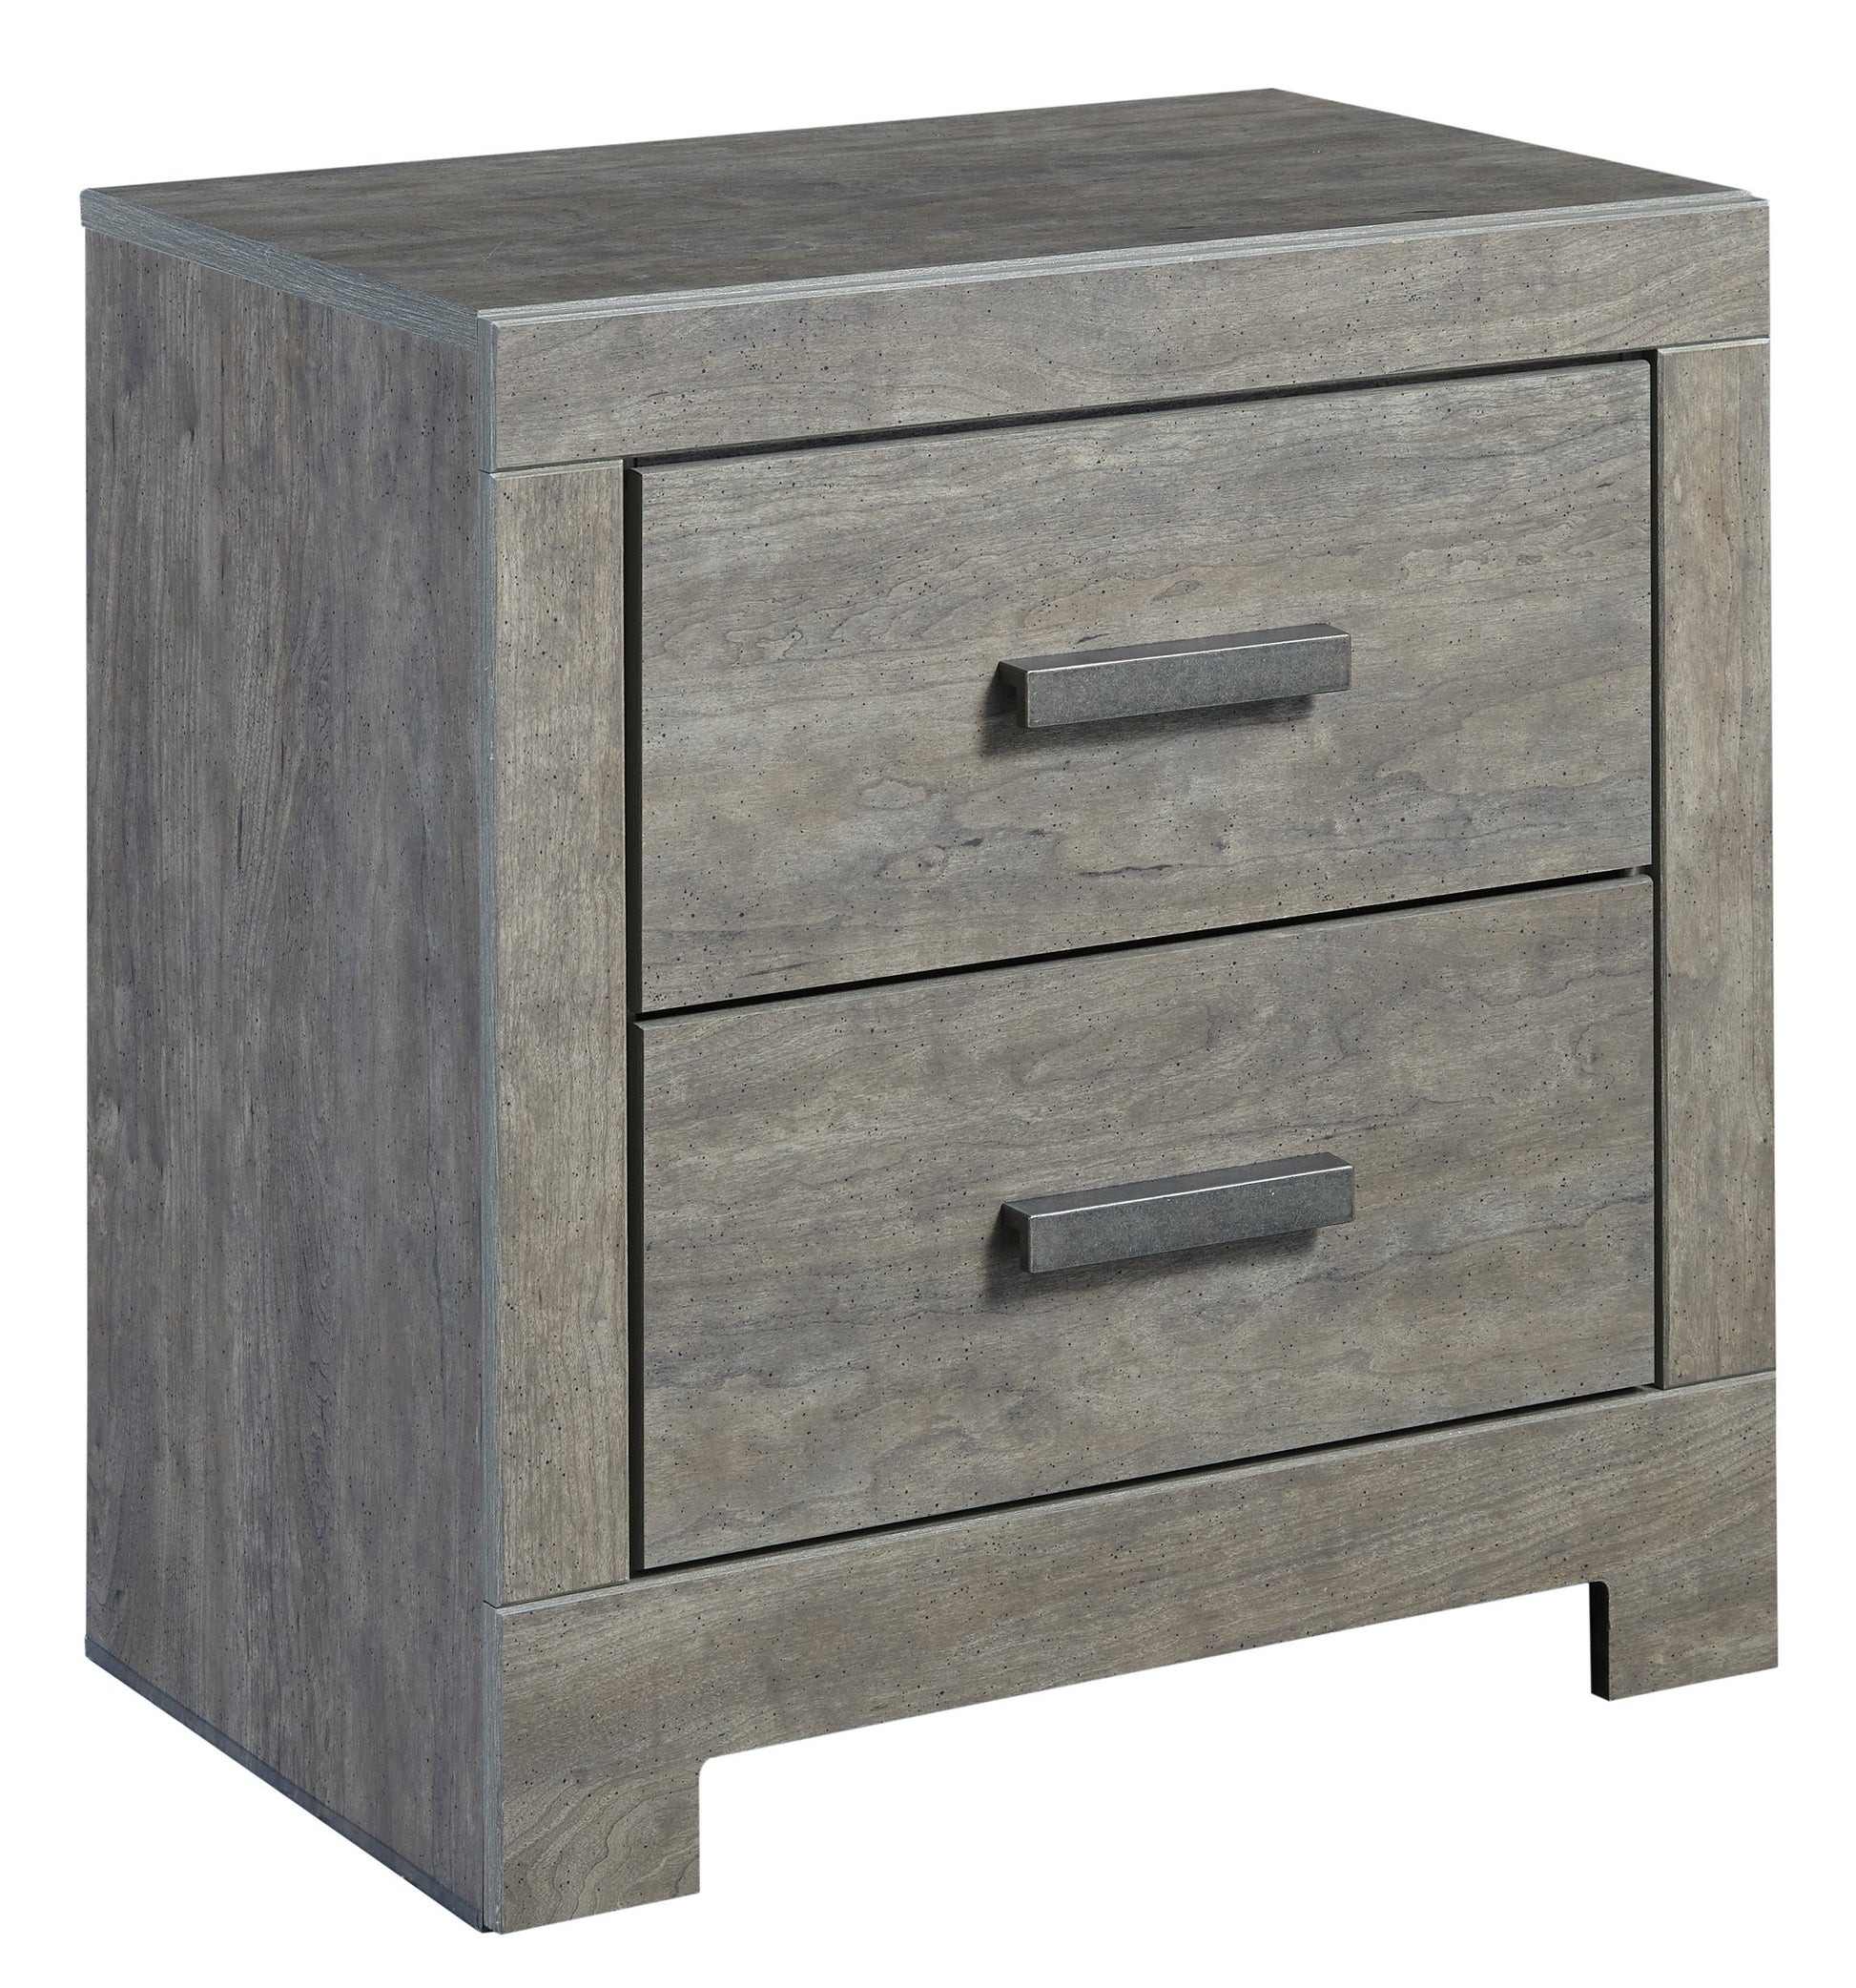 Ashley Culverbach 6 PC Queen Bedroom Set w/2 Nightstand & Chest in Gray - The Furniture Space.